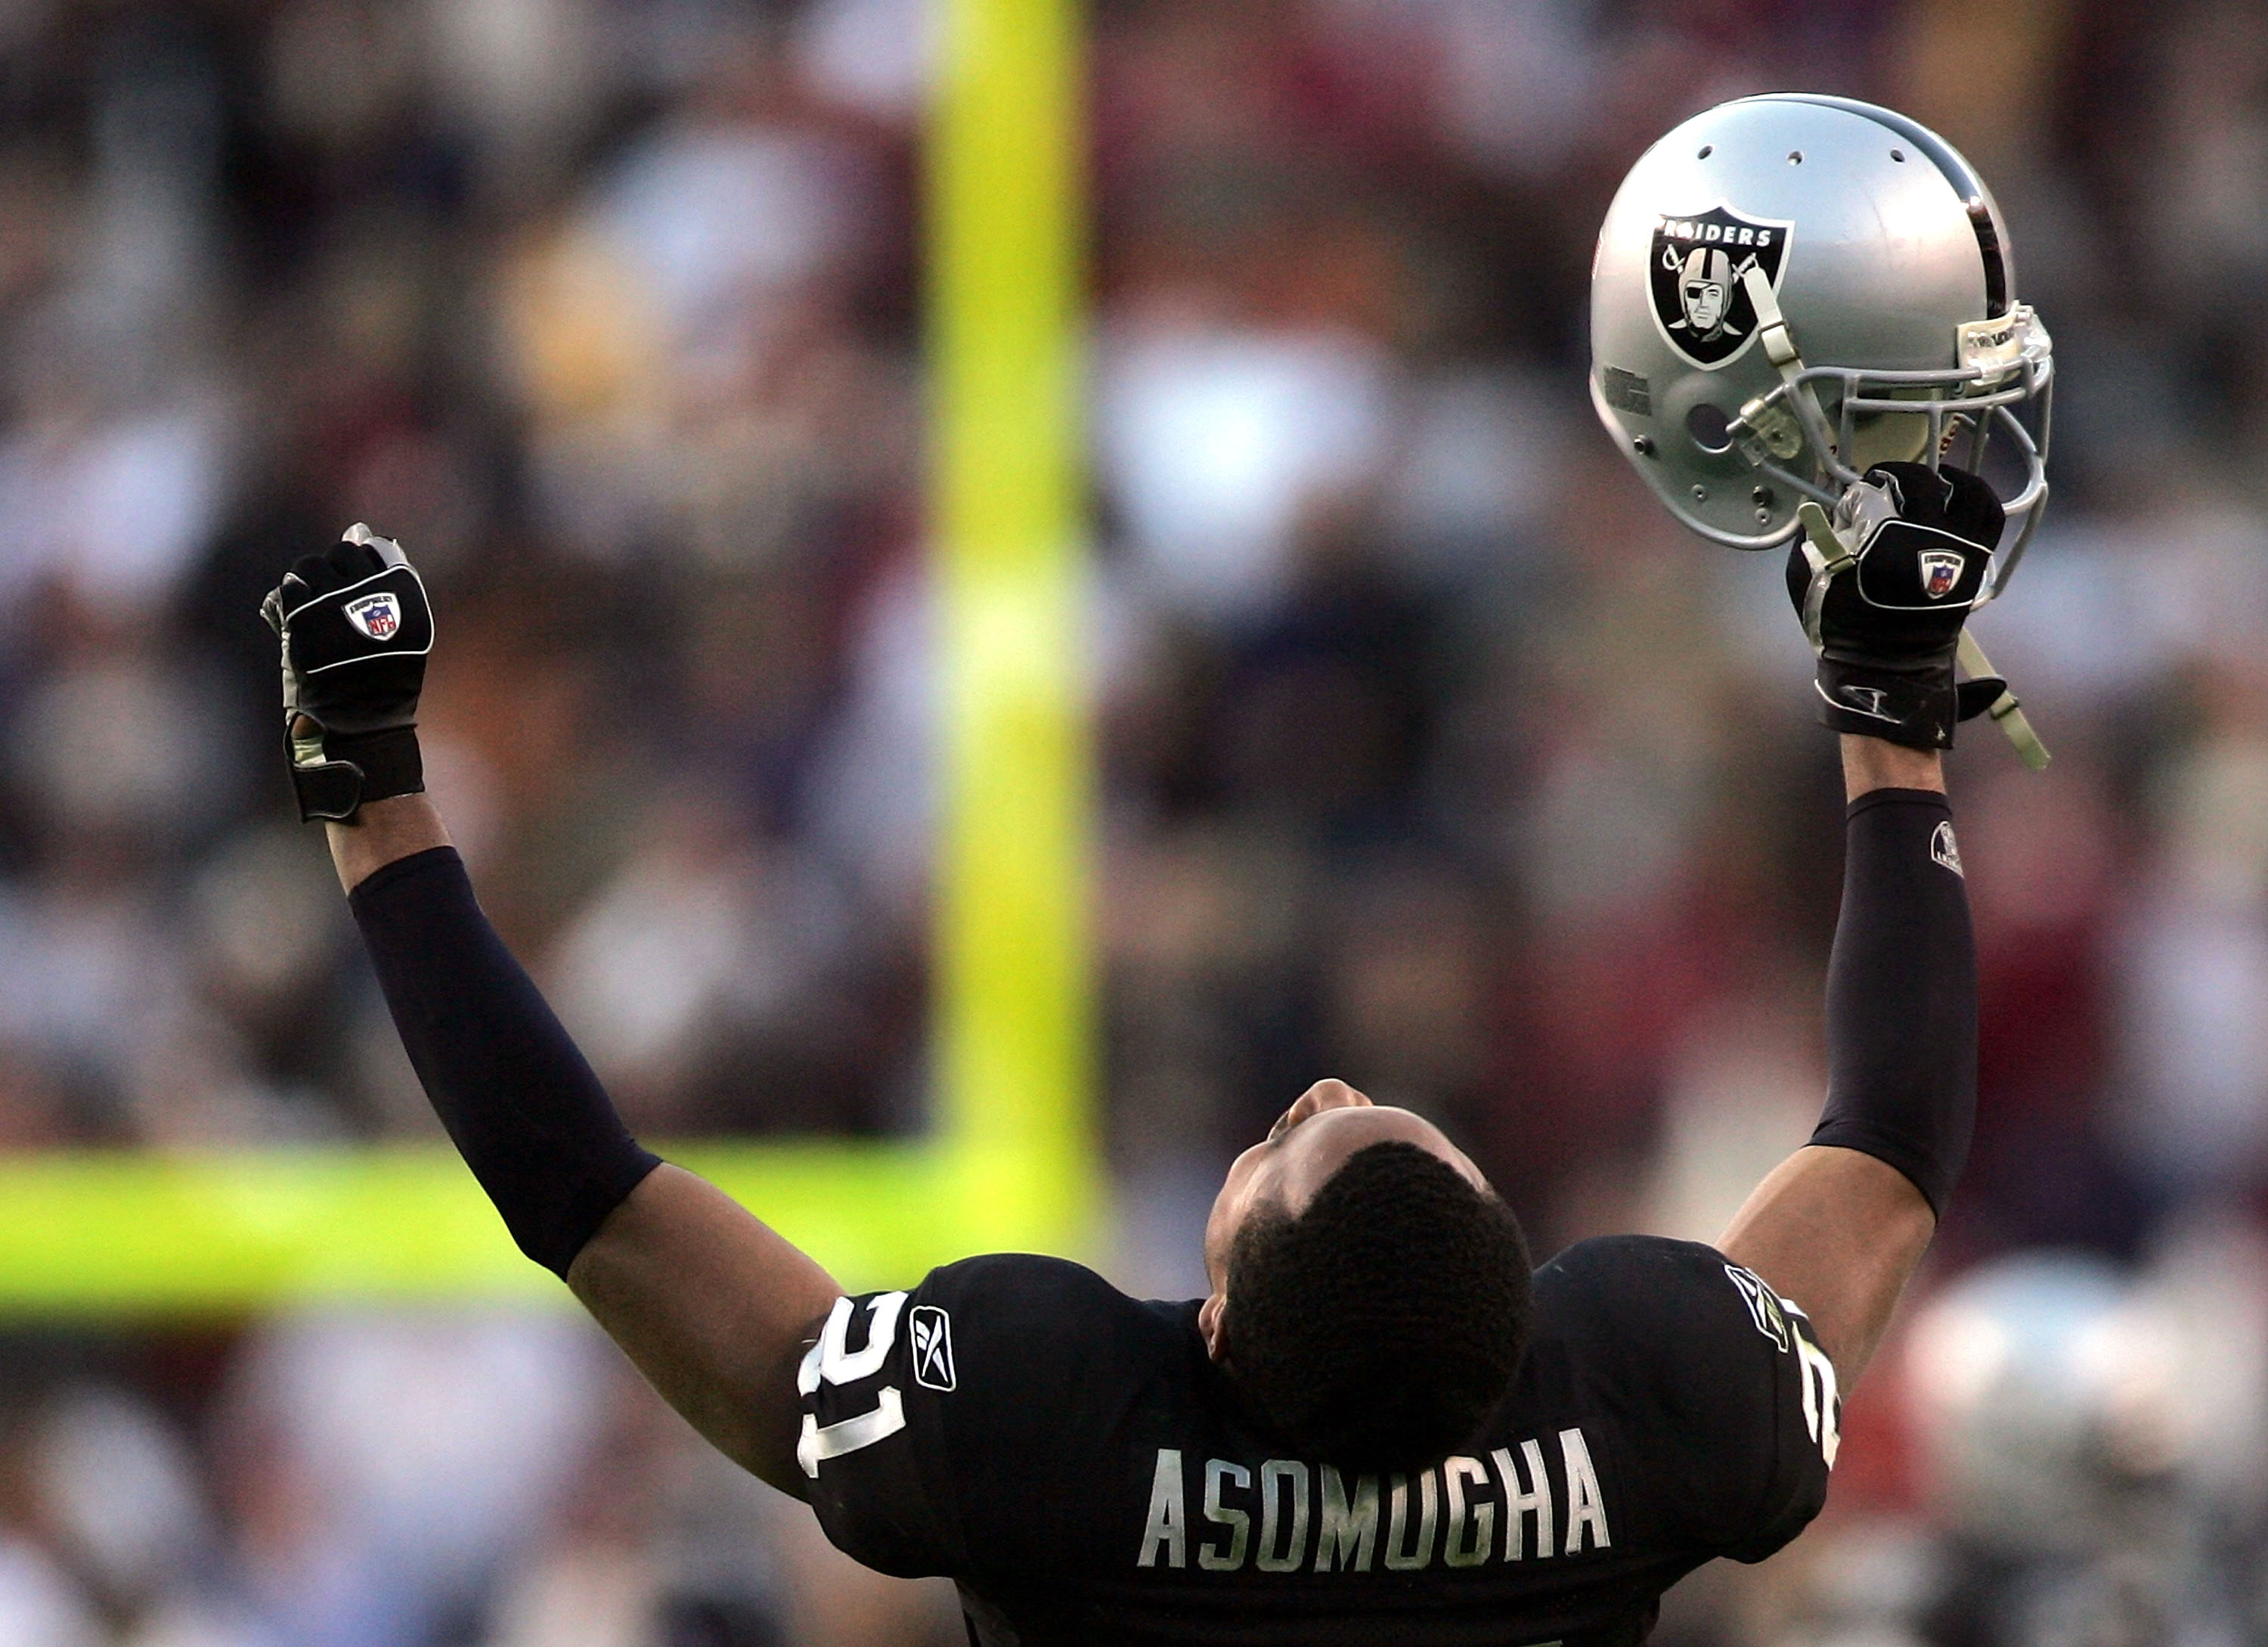 WASHINGTON - NOVEMBER 20:  Oakland Raiders cornerback Nnamdi Asomugha #21 celebrates after the Raiders recovered a game winning fumble in the fourth quarter on November 20, 2005 at Fed Ex Field in Landover, Maryland.  (Photo by Win McNamee/Getty Images)